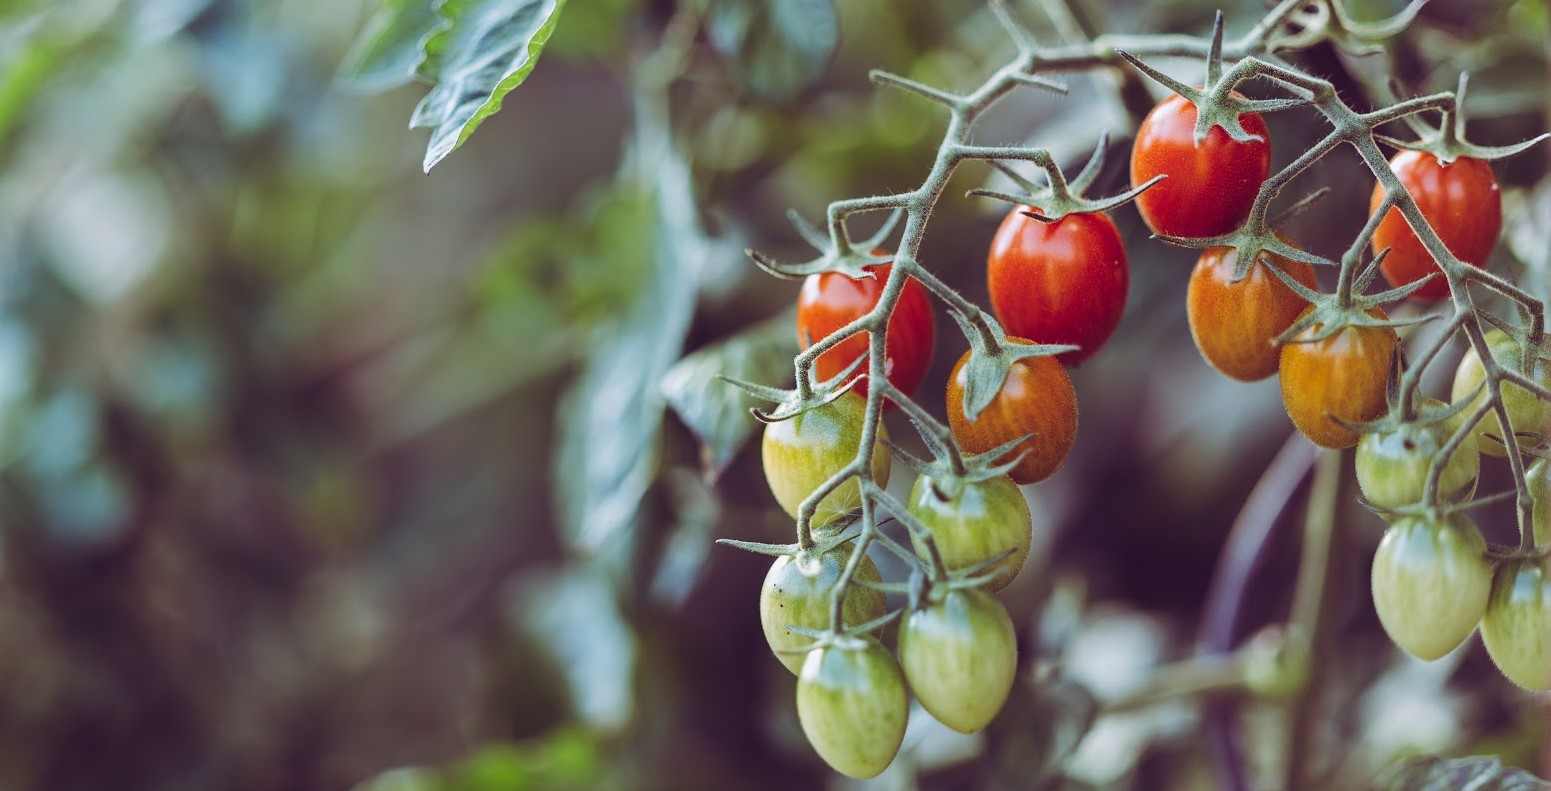  Tomato Nutrition Data and Health Benefits 